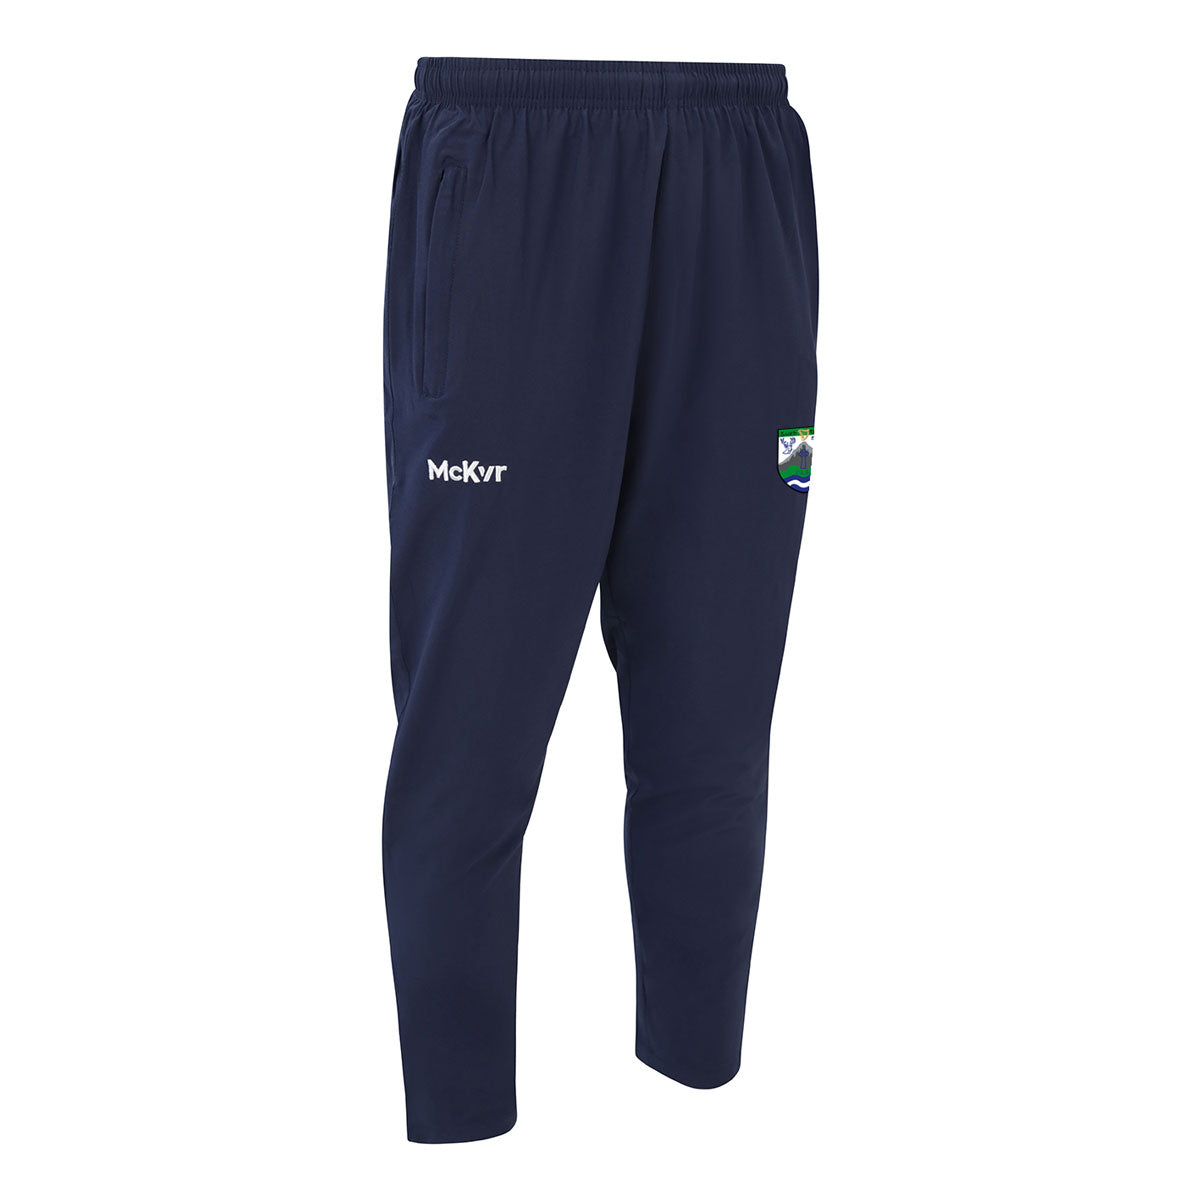 Mc Keever CLG Ghaoth Dobhair Core 22 Tapered Pants - Adult - Navy